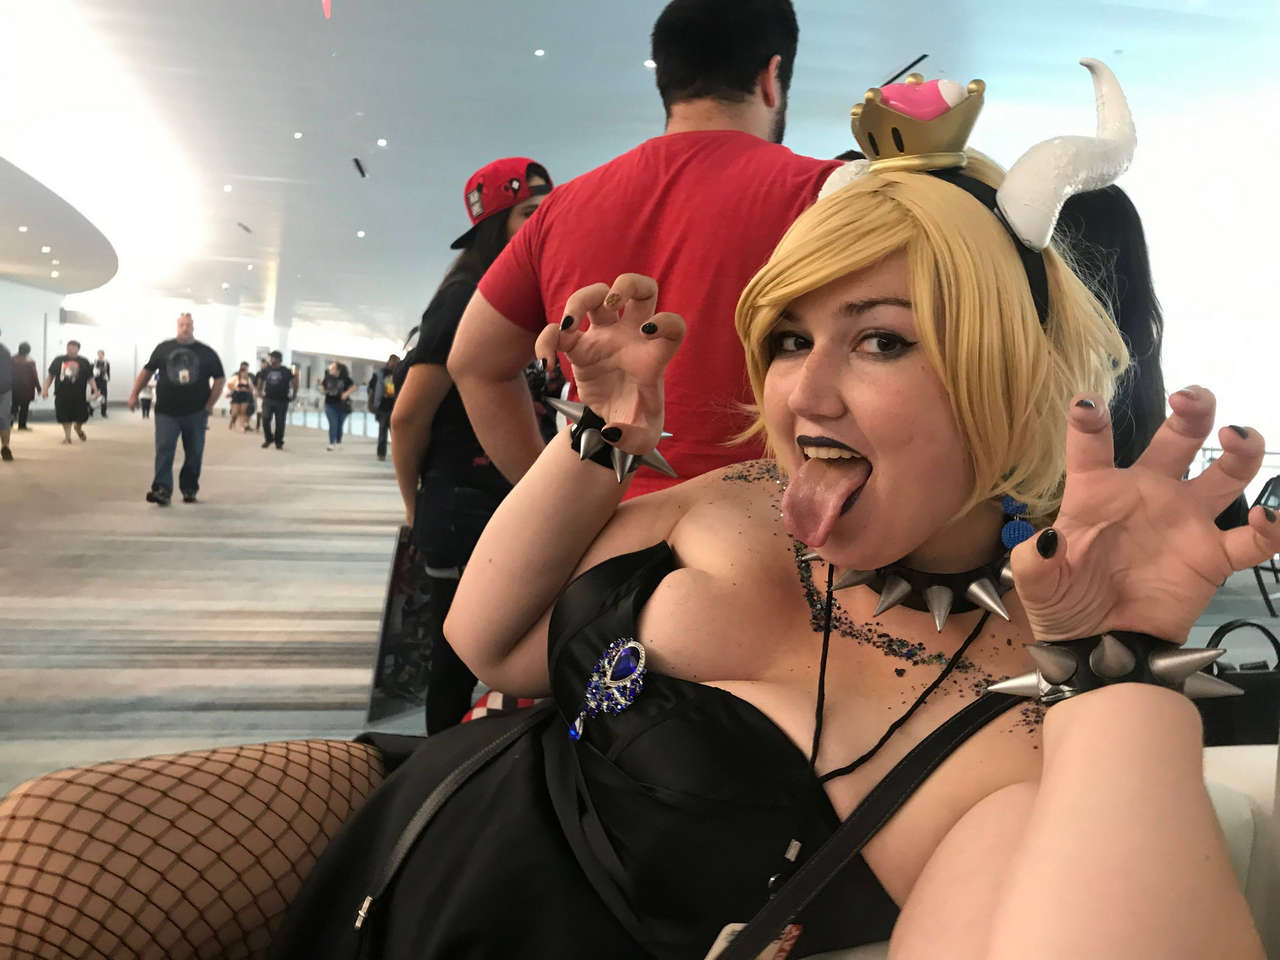 My Friend As Bowsette At Supercon In Miami 0